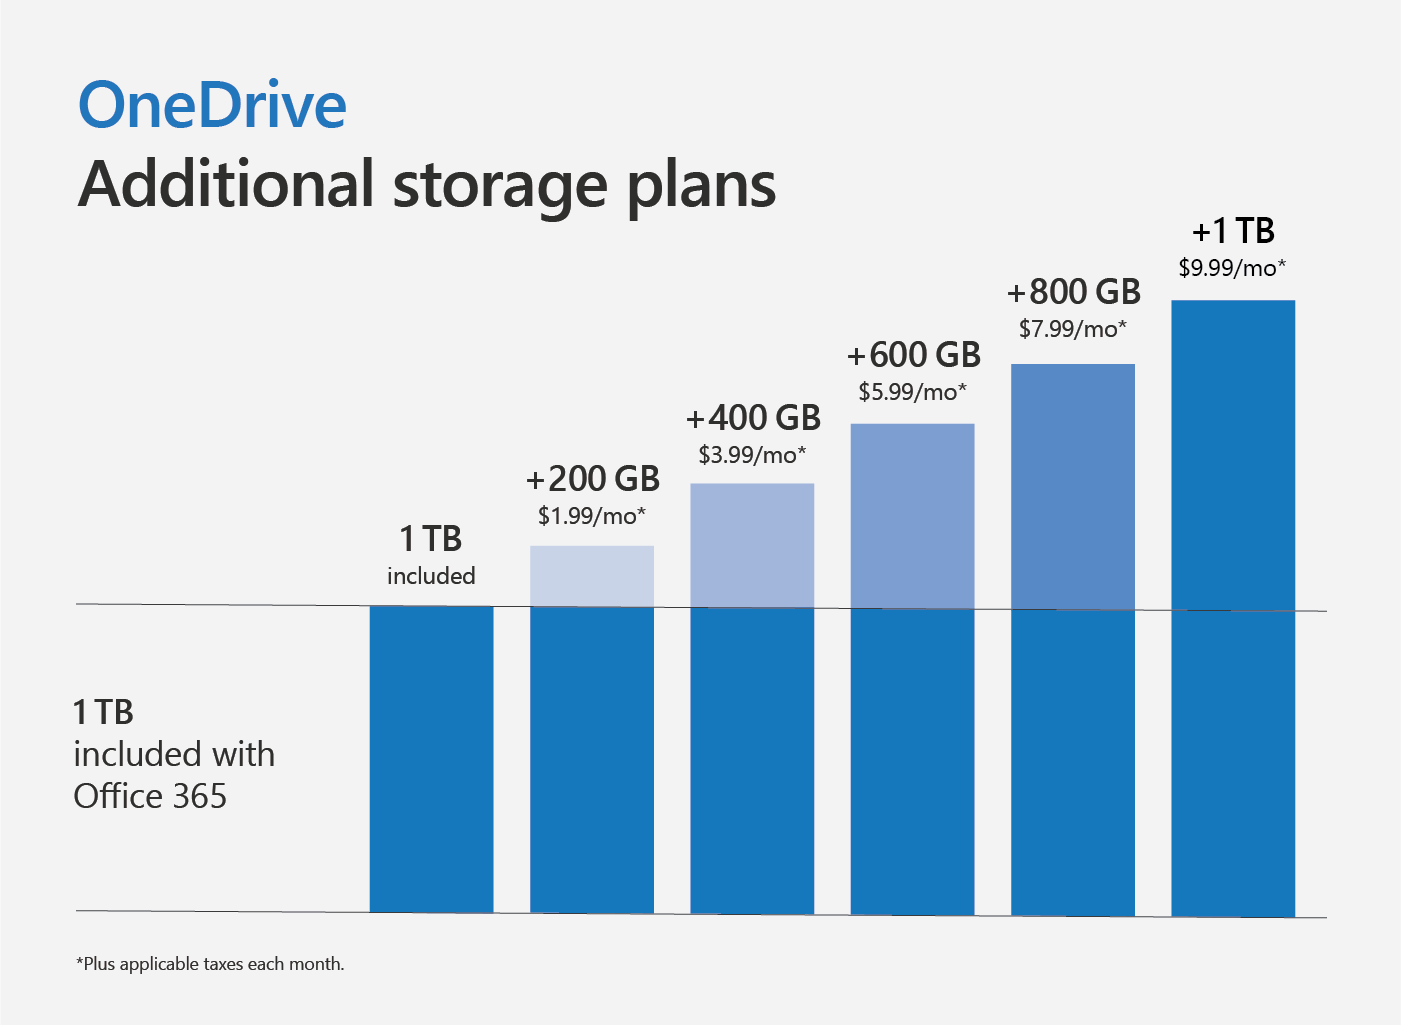 Graph showing the additional storage plans for OneDrive.